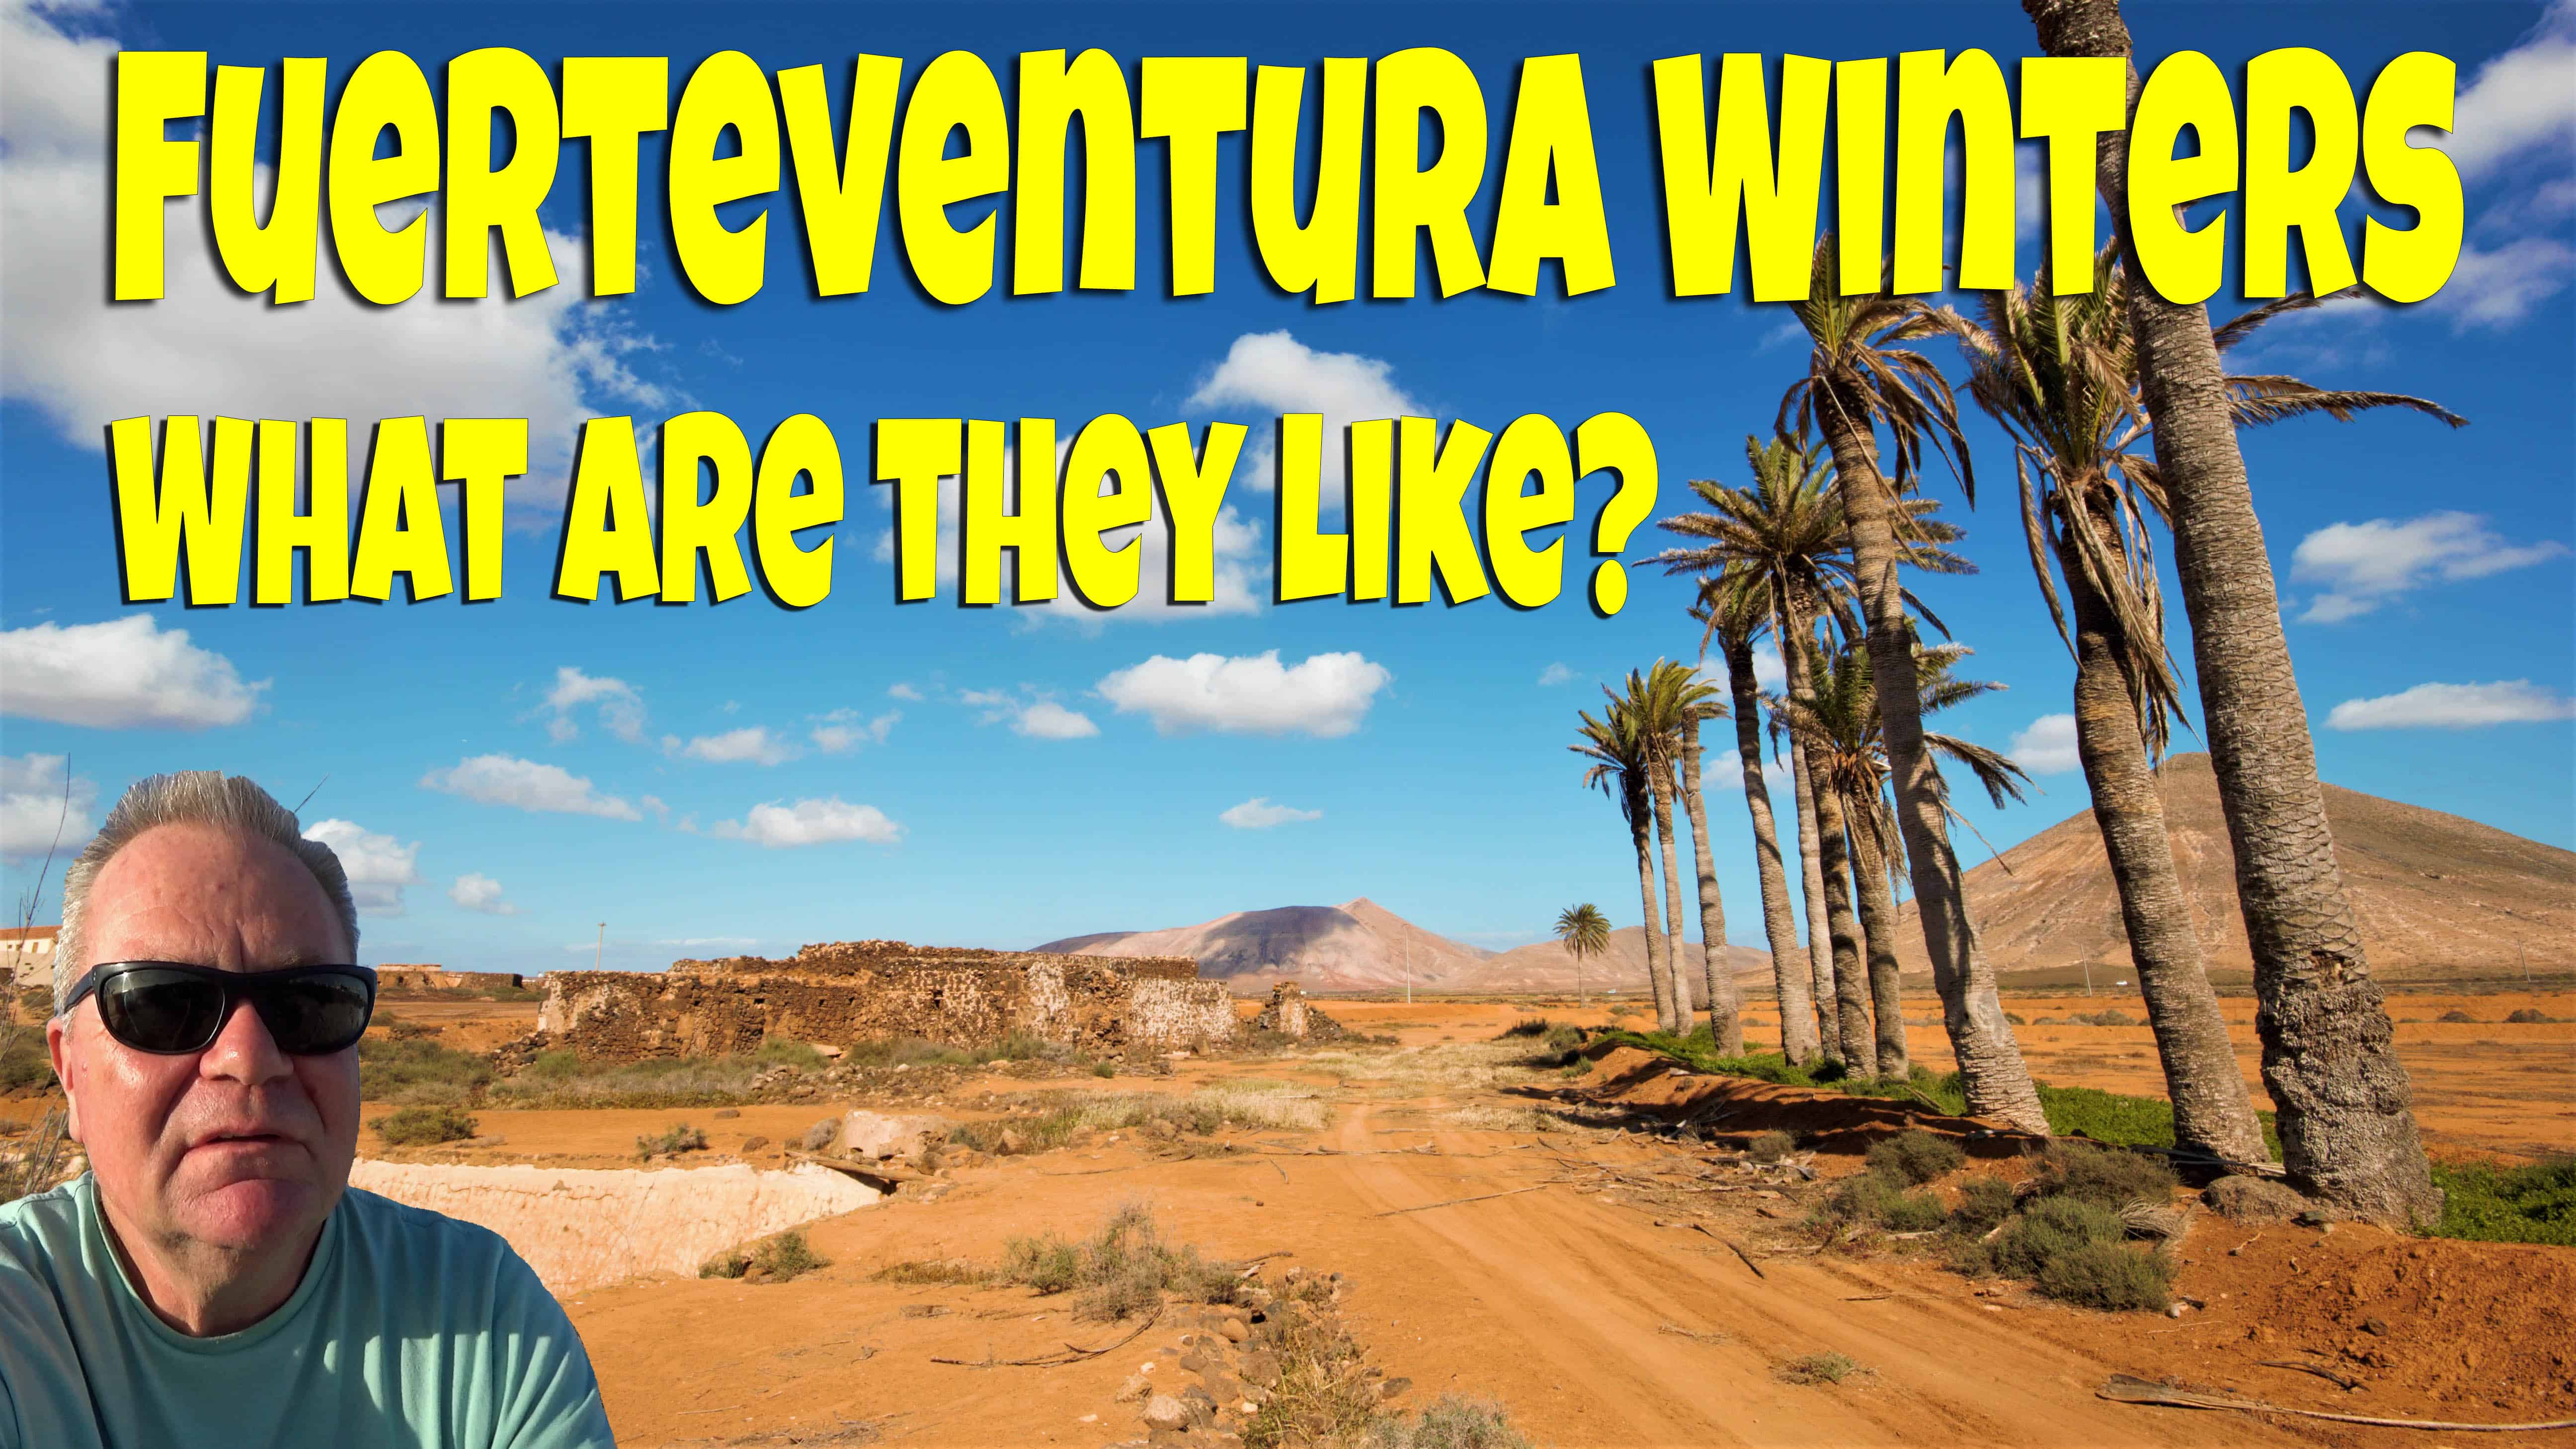 What is the weather like in Fuerteventura in winter?